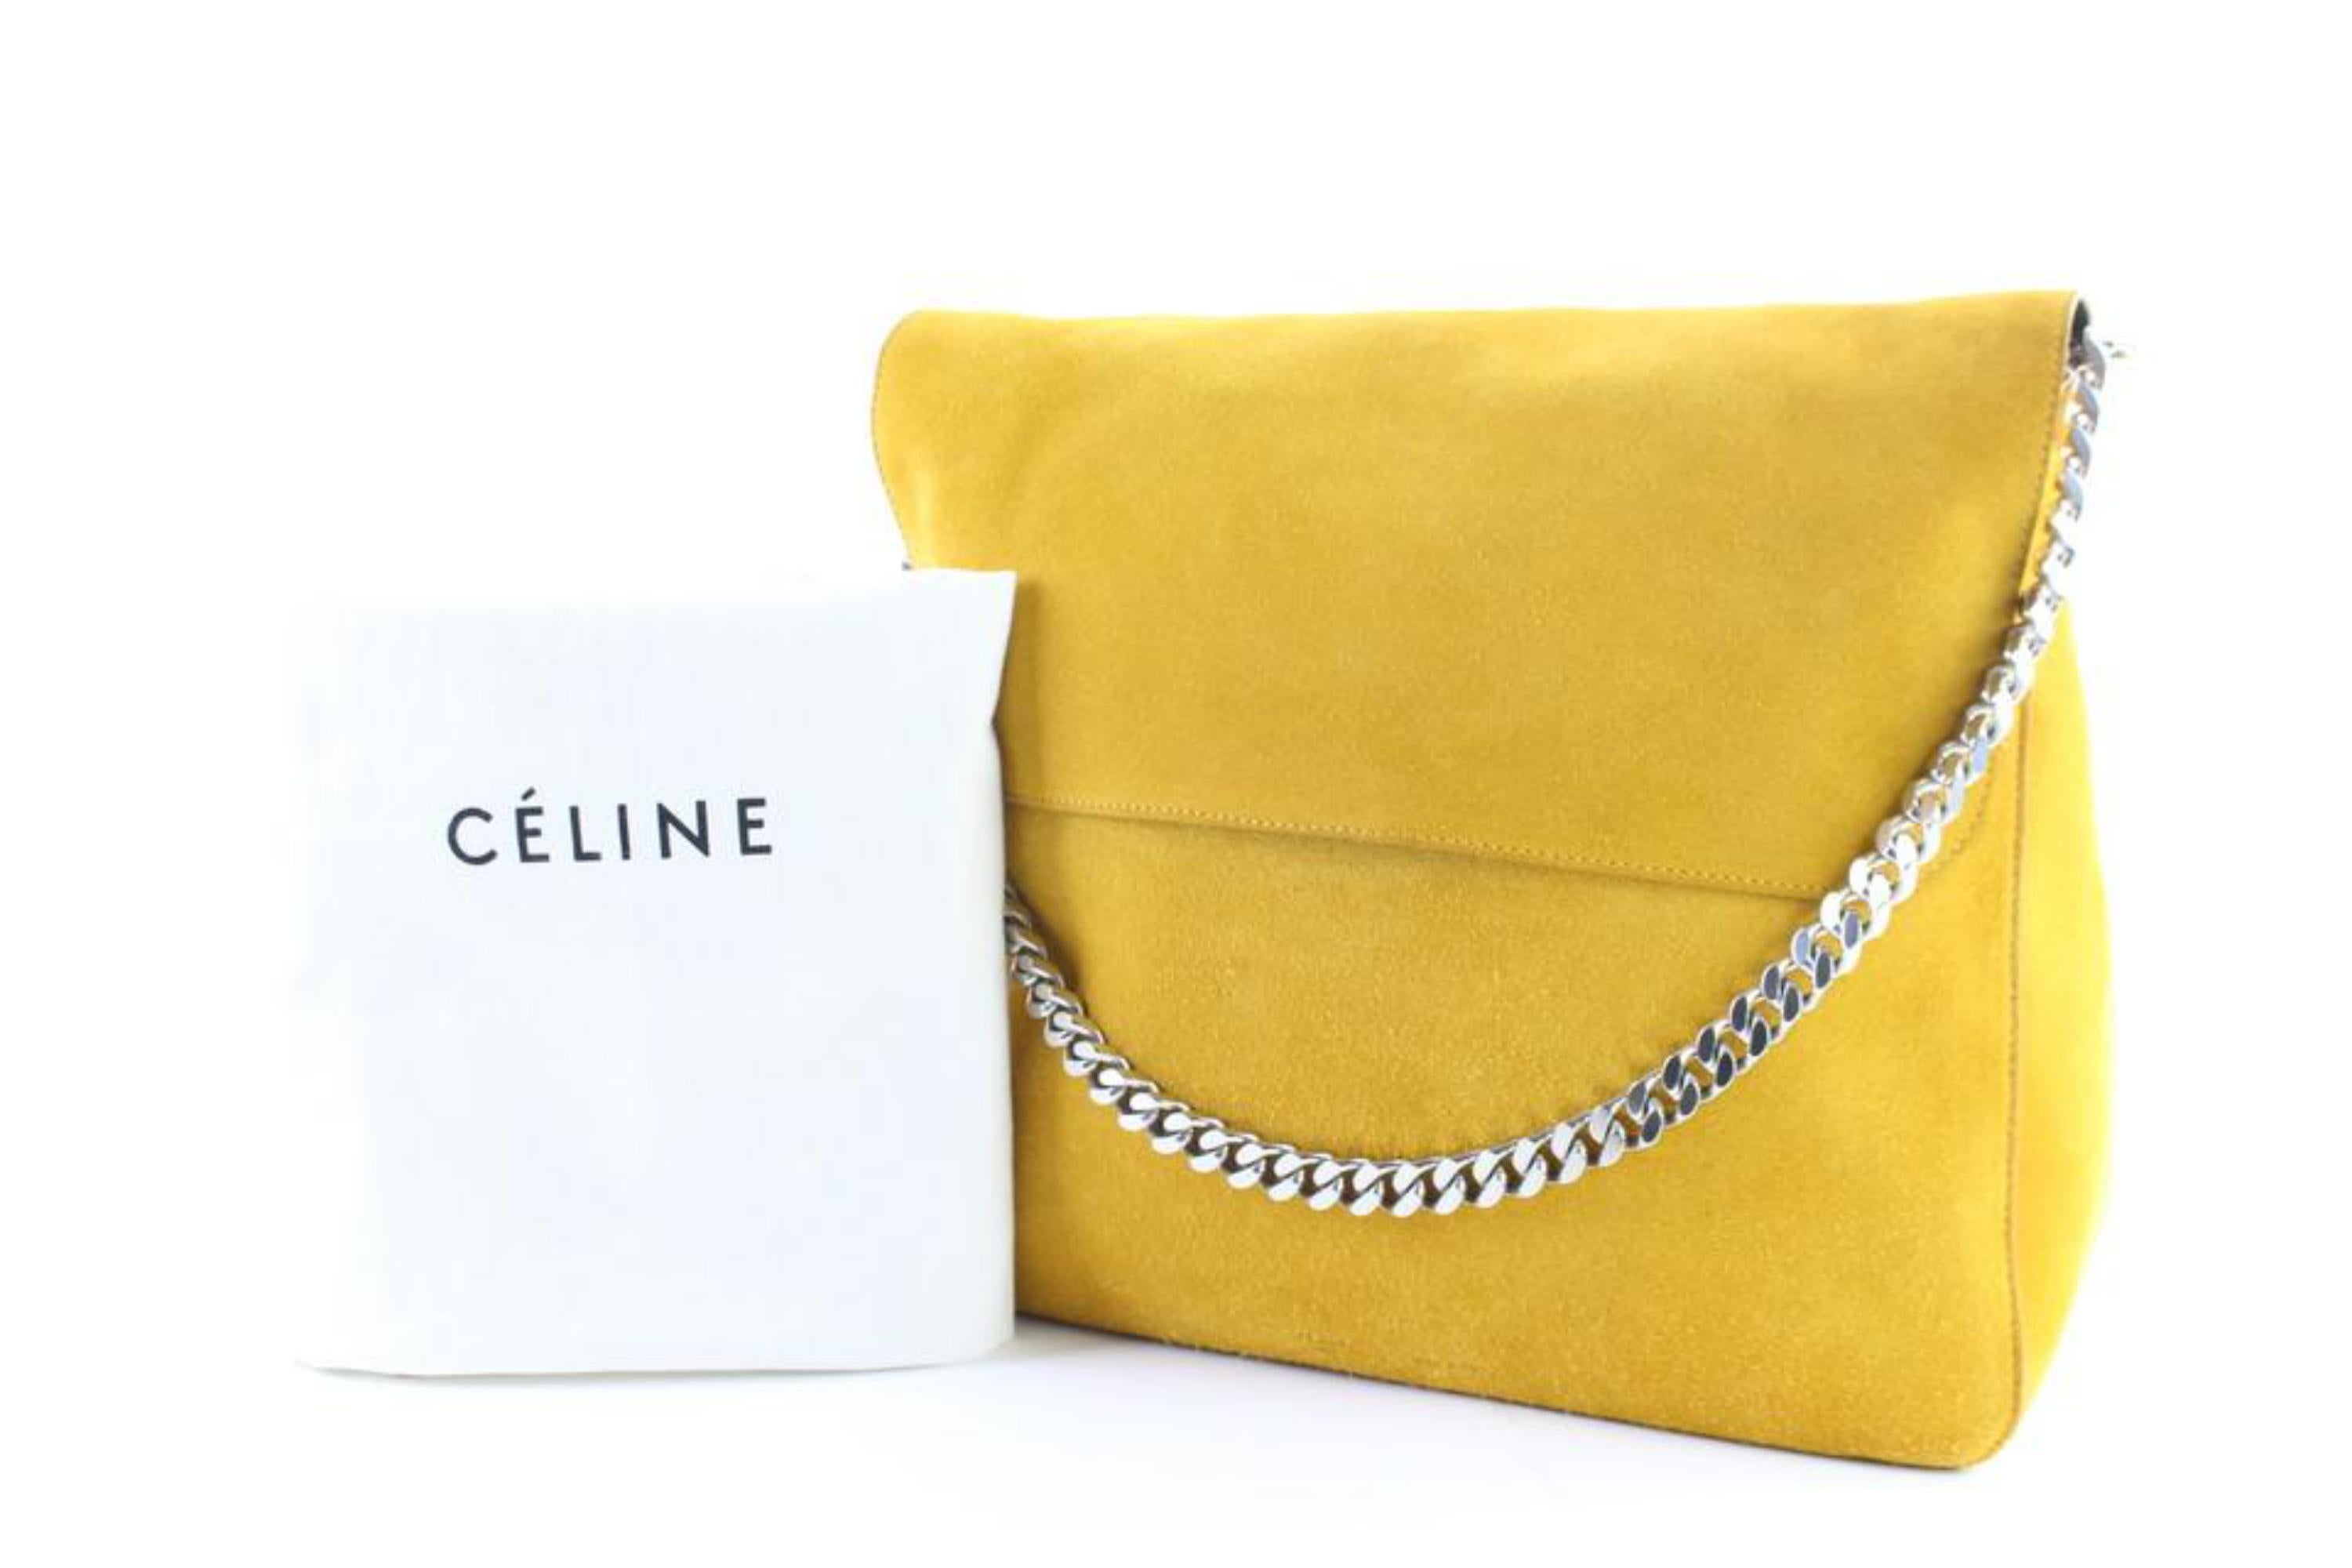 Céline Mustard Yellow Gourmette Chain Hobo 2CE1123
Date Code/Serial Number: F-MP 0133
Made In: Italy
Measurements: Length: 12.5